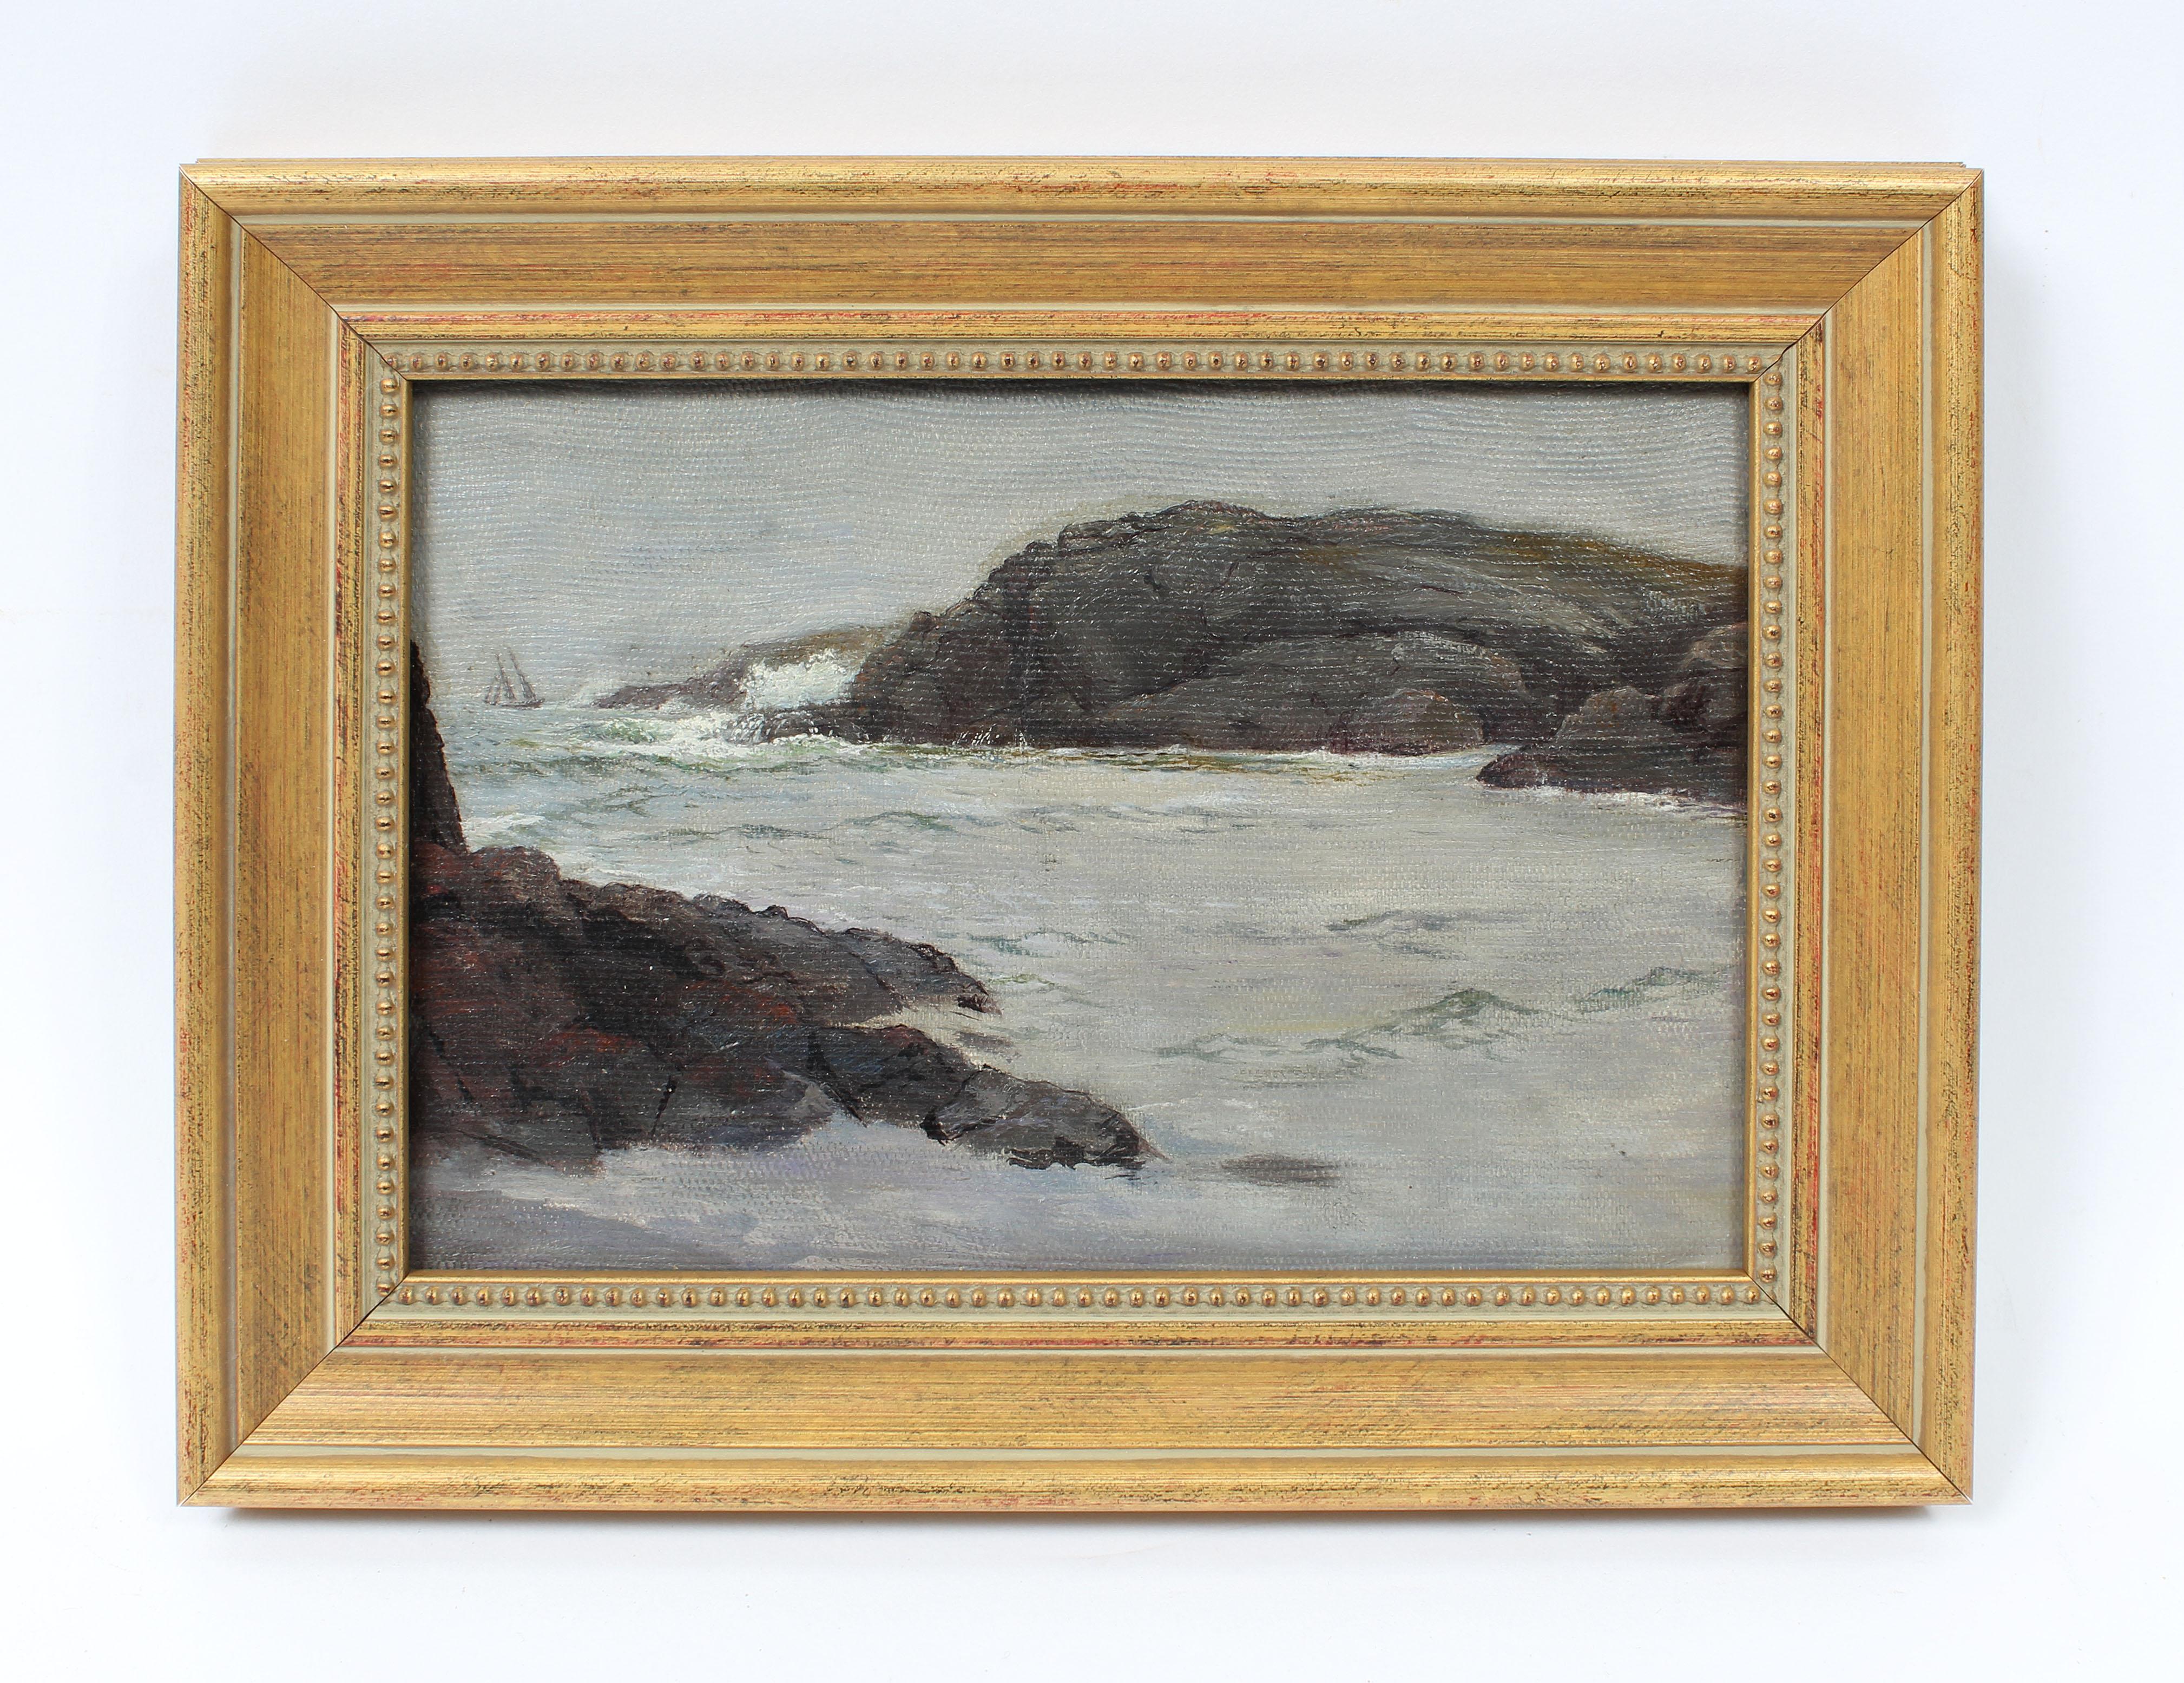 Antique American School Impressionist Seascape Ocean Wave Study Oil Painting - Brown Landscape Painting by Unknown